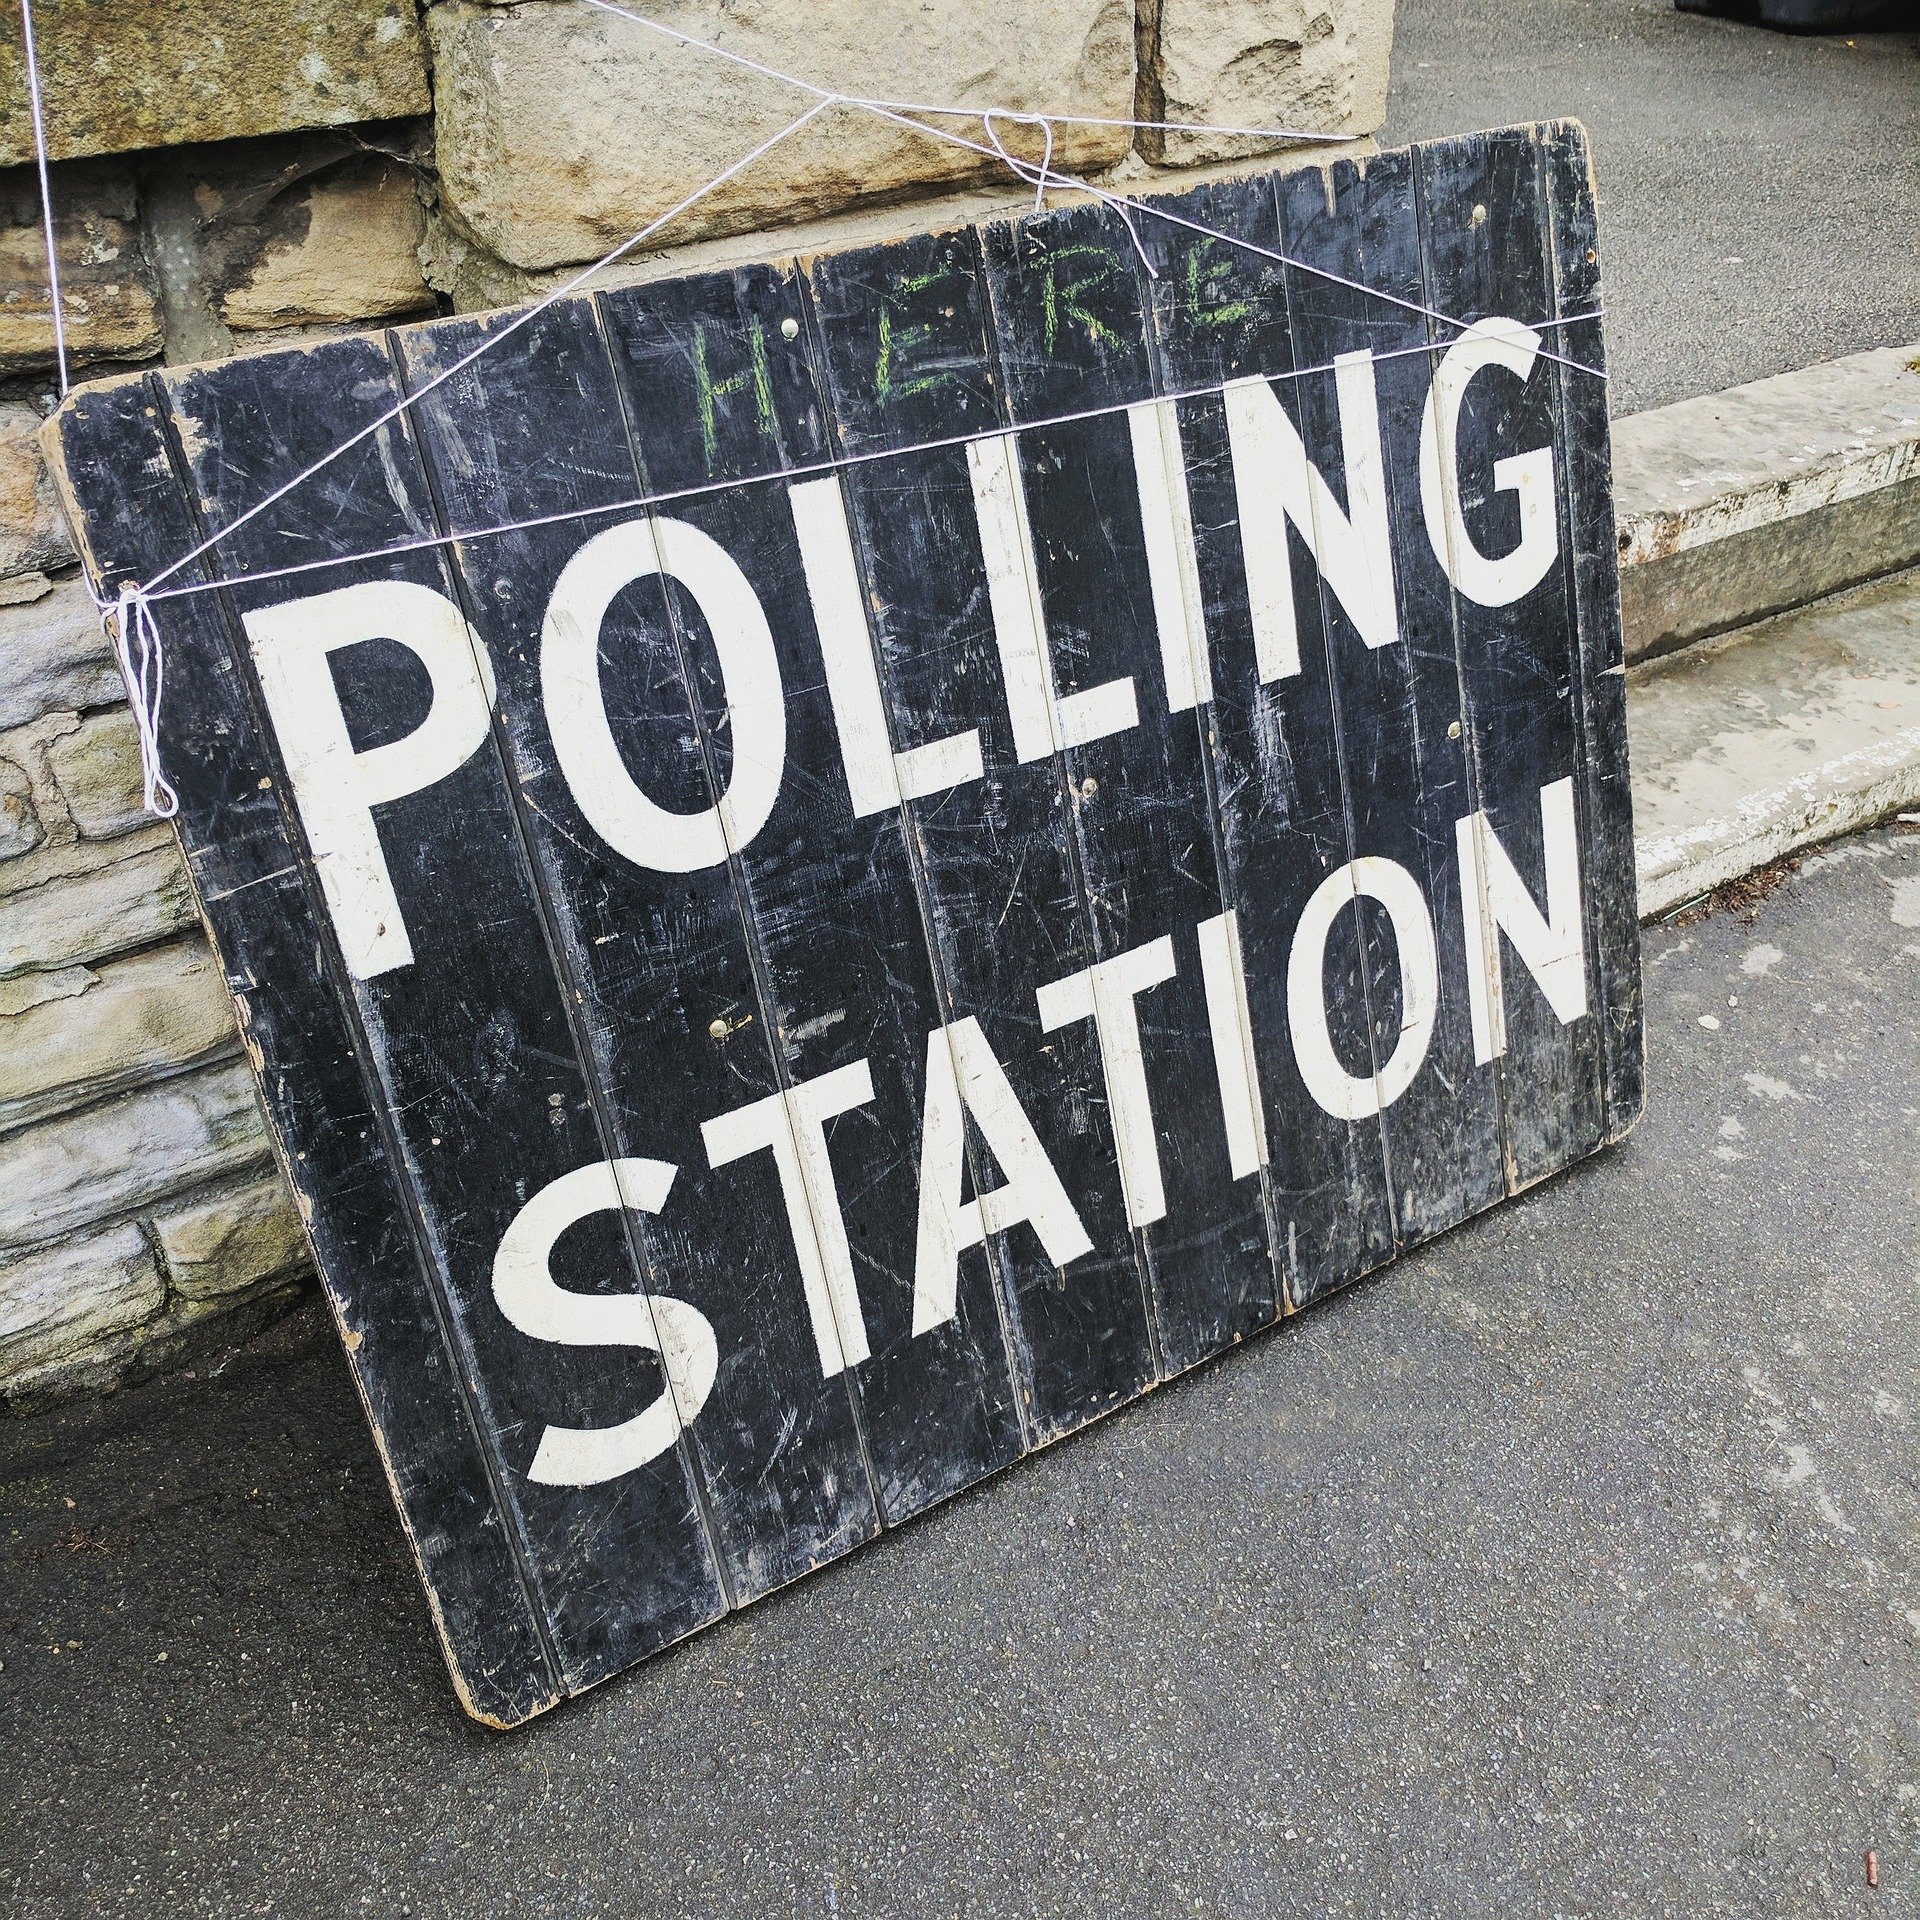 UK voters are set to go to the polls in December 2019